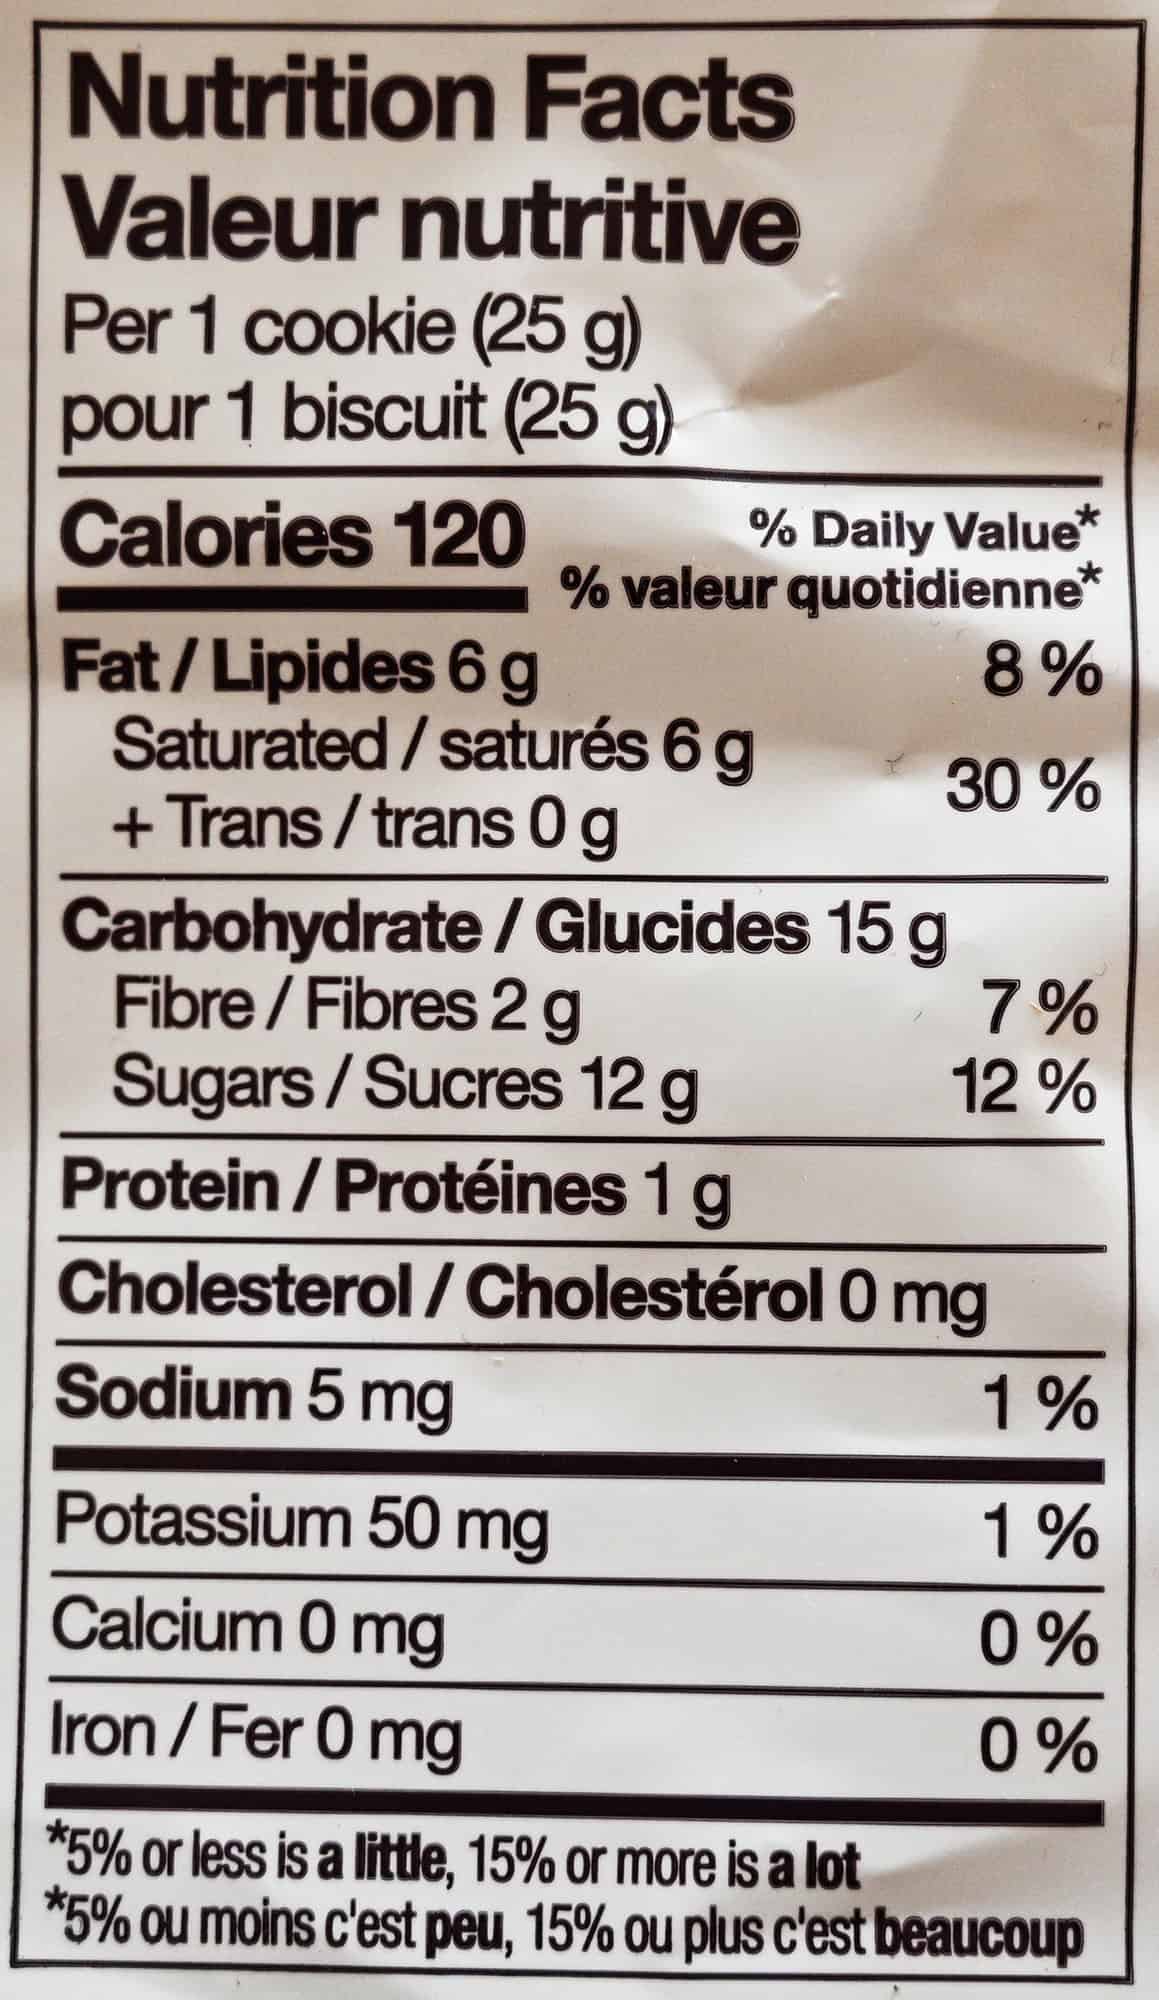 Image of the nutrition facts for the cookies from the back of the bag.